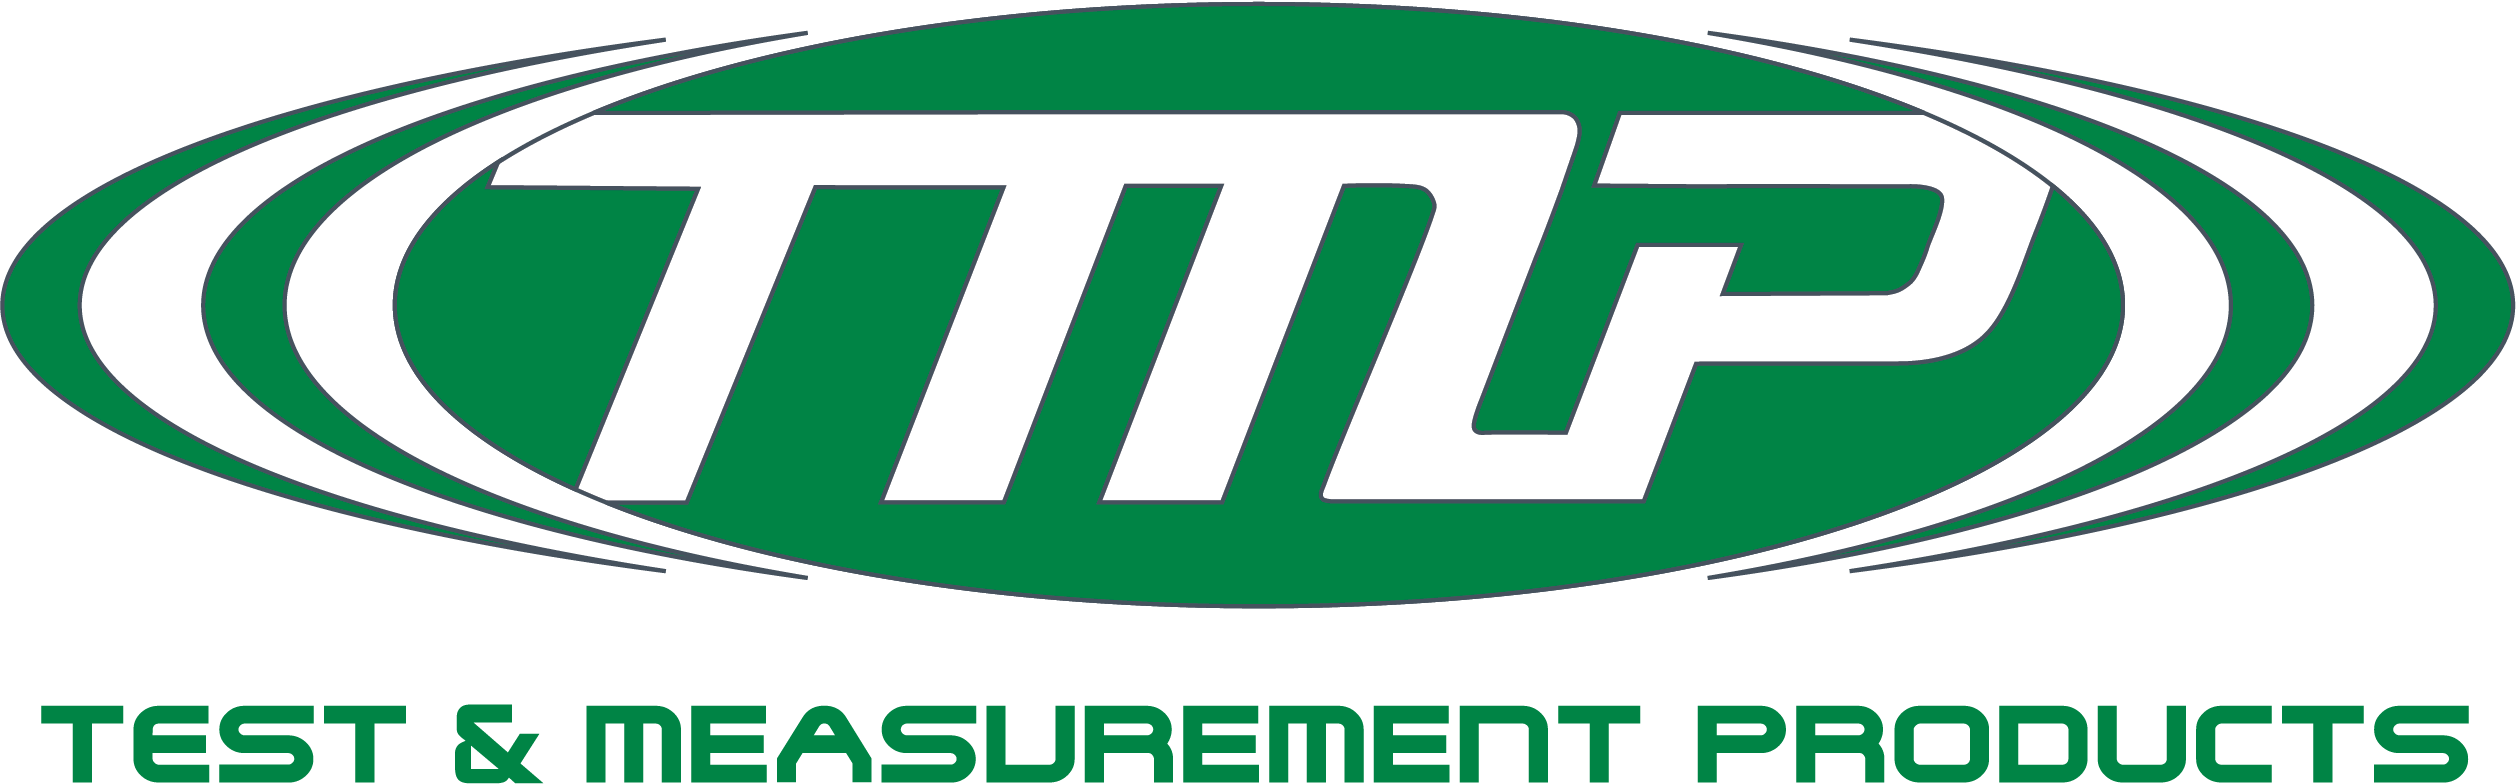 TMP product line logo